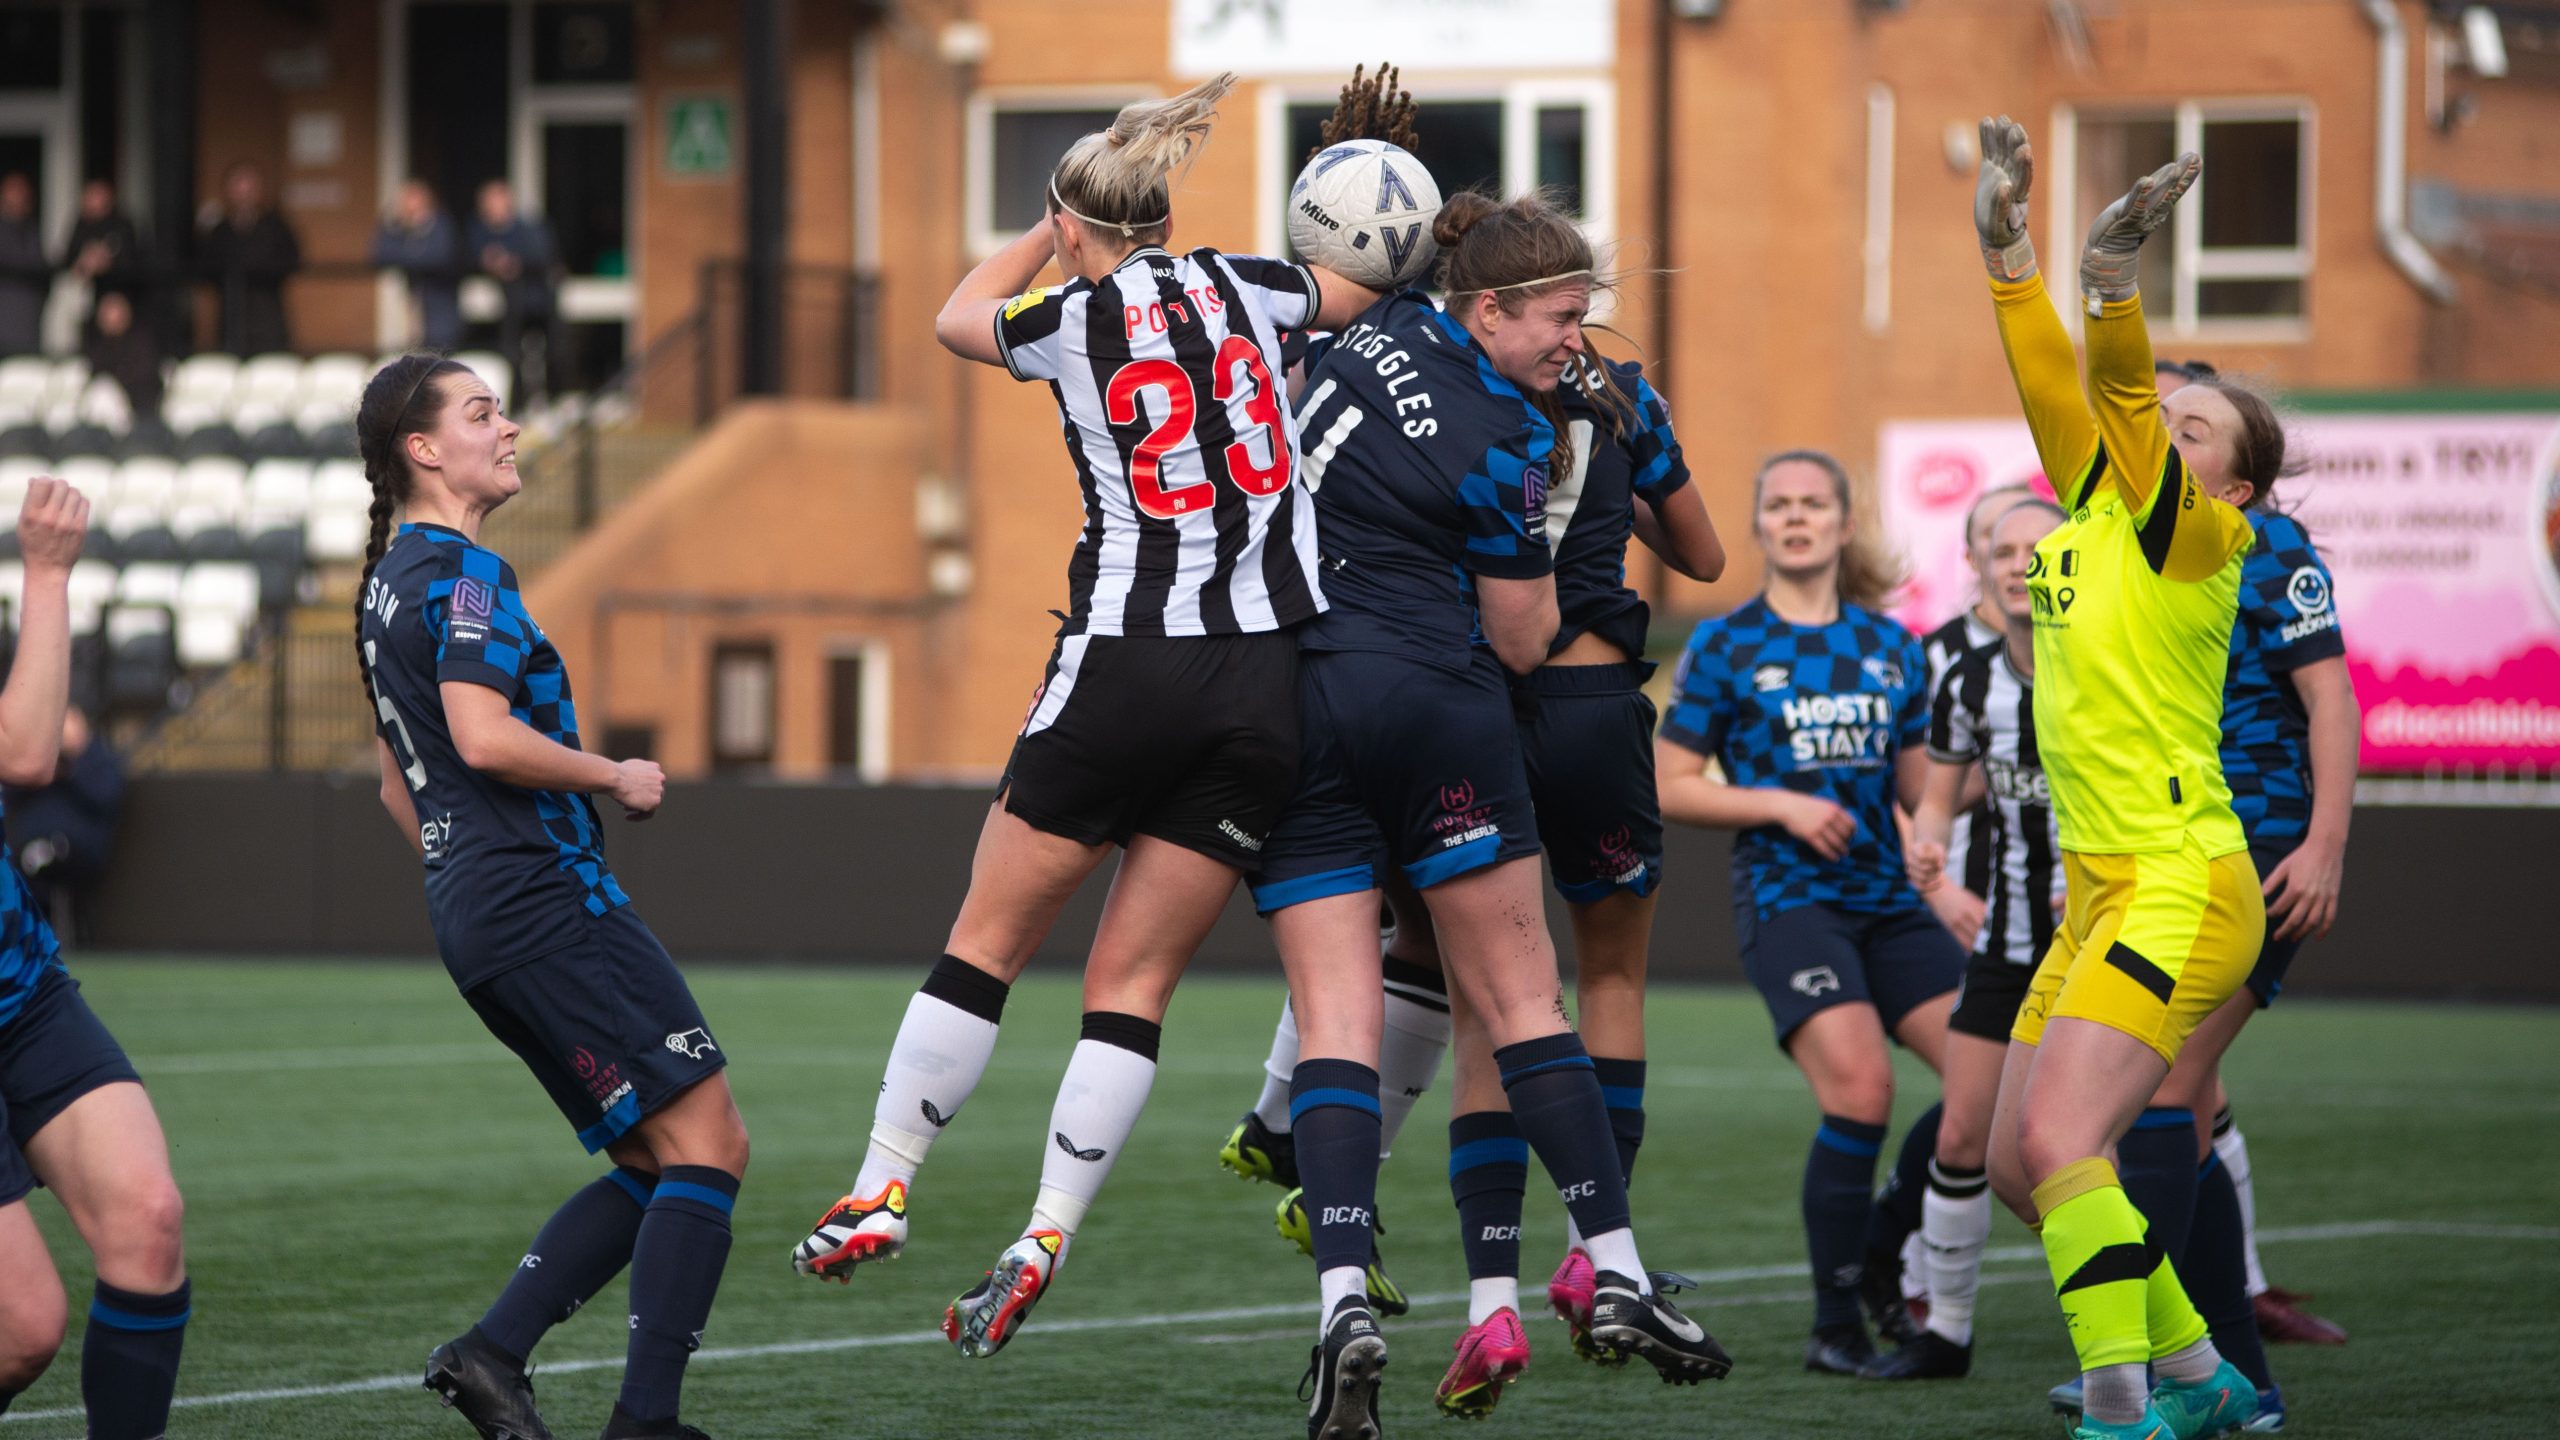 Extended highlights: Newcastle United Women 2 Derby County Women 1